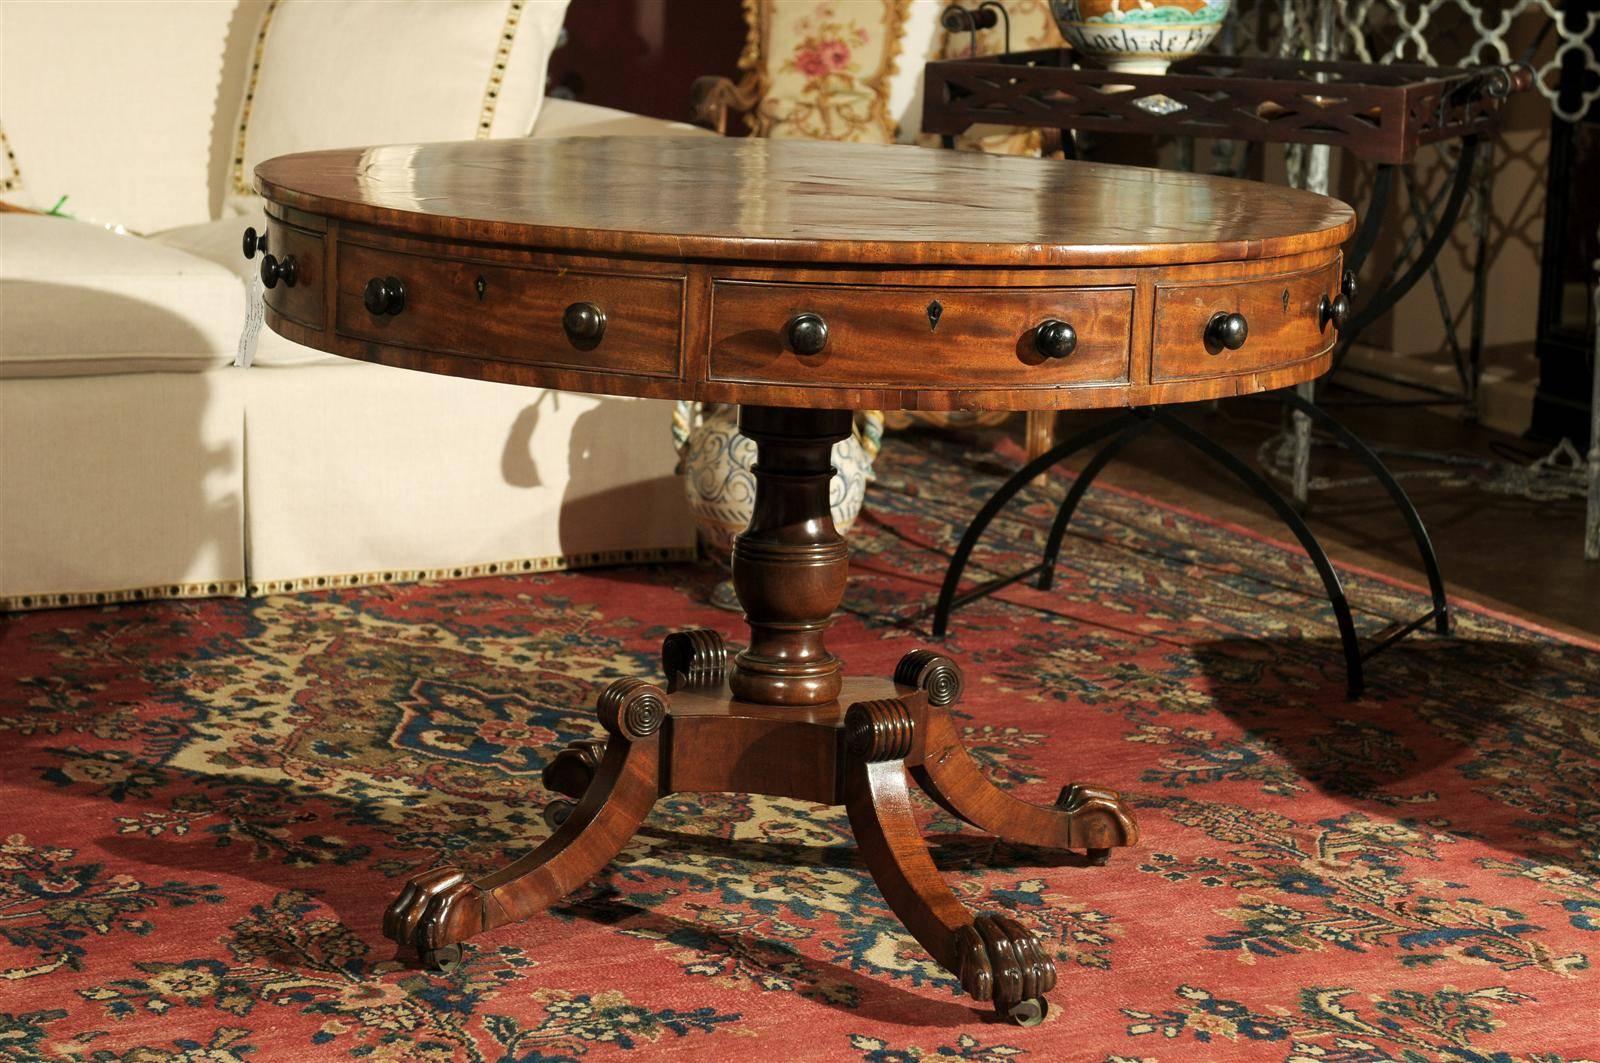 This is a stunning round Regency rent table.  A period in time of great refinement and cultural achievement that shaped and altered the societal structure of Britain. 
For an entrance piece in your foyer or a lovely side table in a library this is a